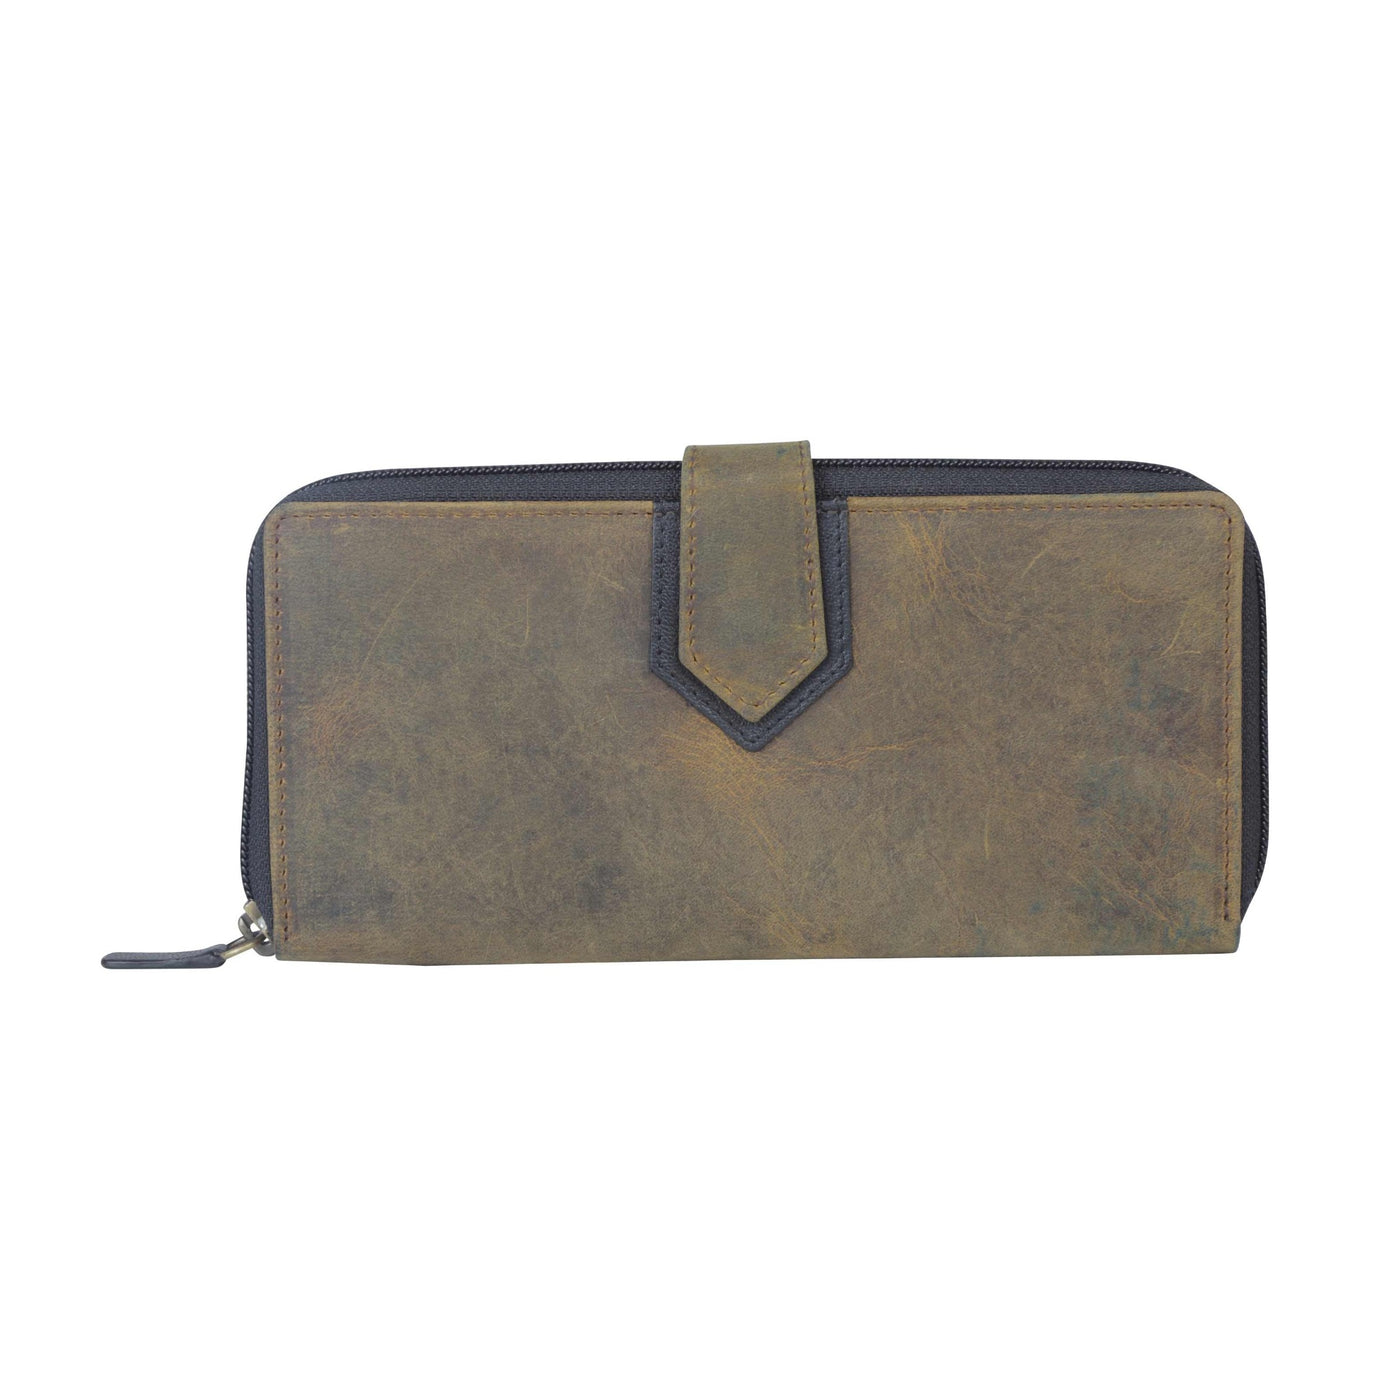 Myra - Noble Brown Leather Wallet